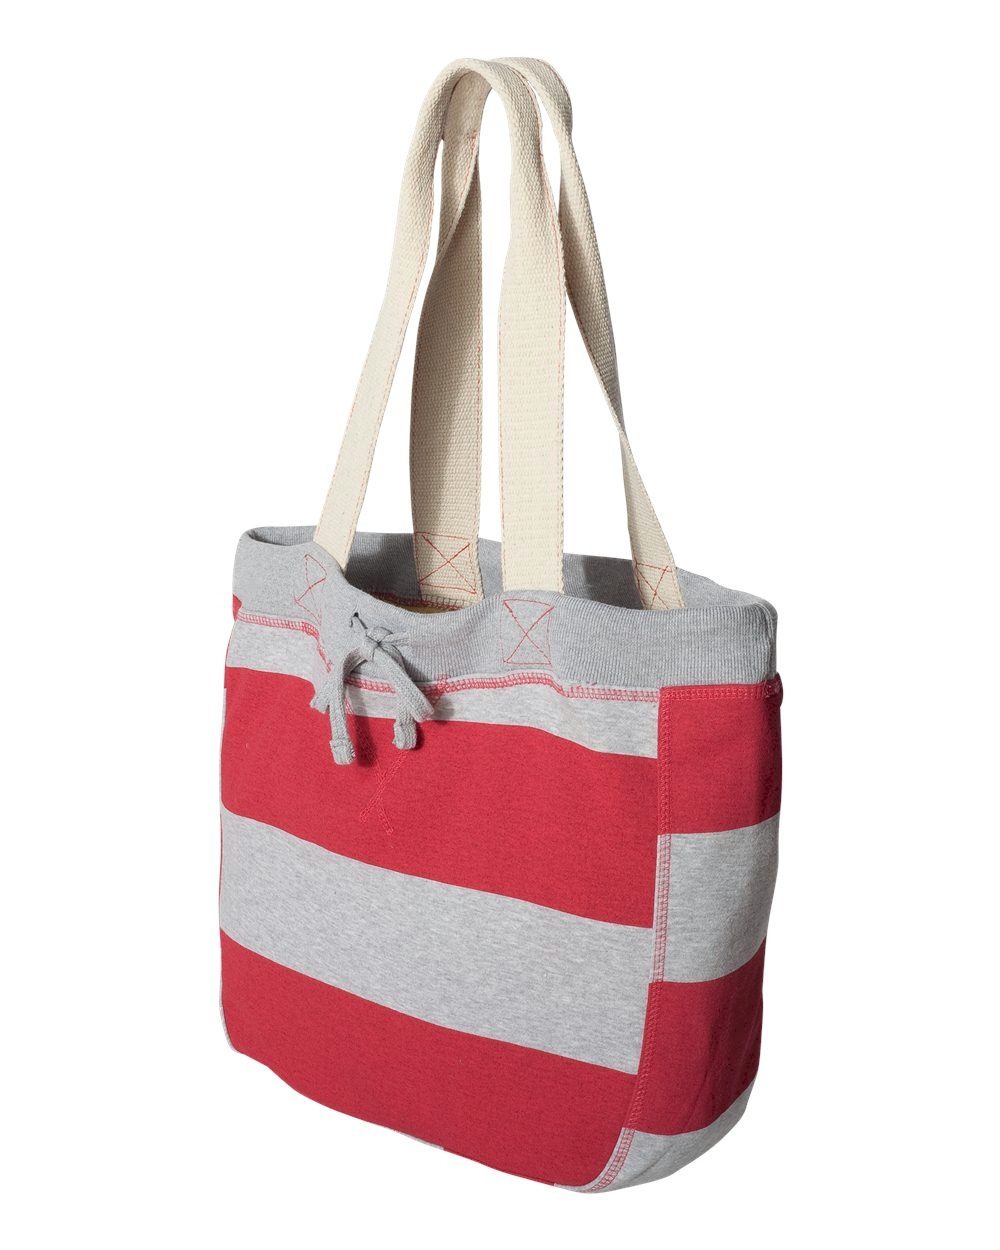 MV Sport Pro-Weave Beachcomber Bag Embroidery Blanks - HEATHER/RED